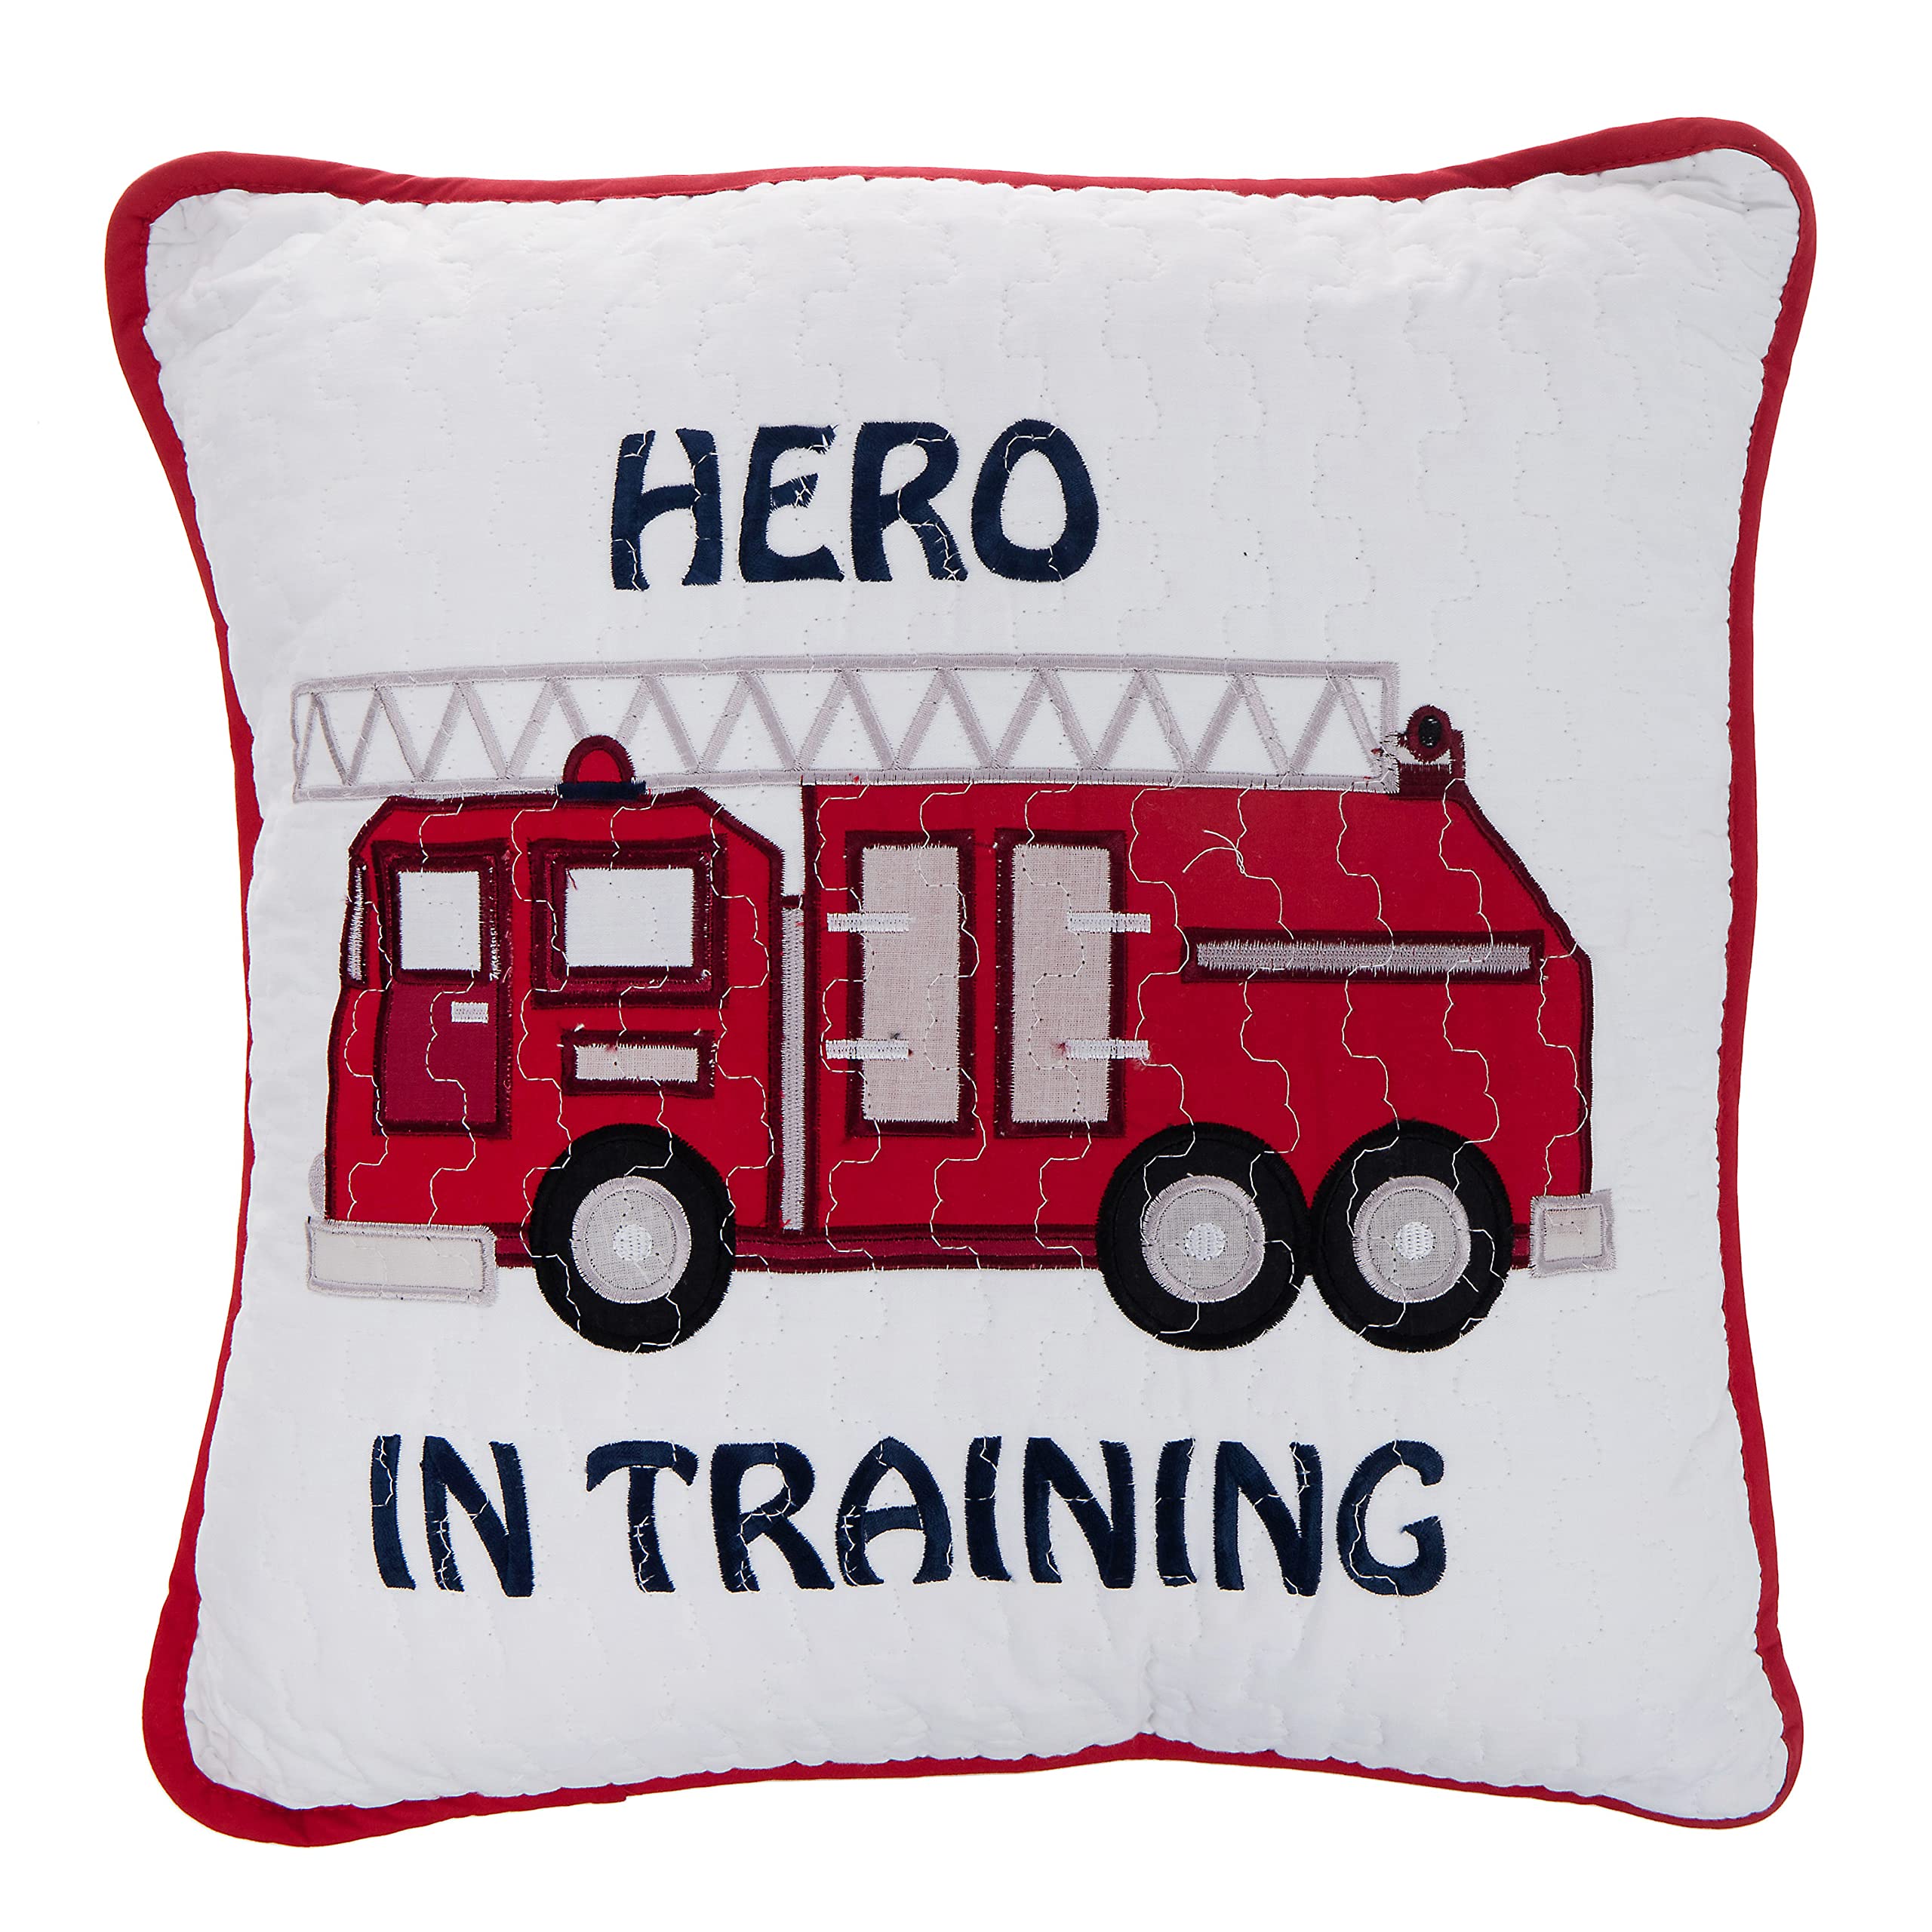 Cozy Line Home Fashions Hero Square Throw Pillow, Red White Embroidered Print Pattern Cotton Decorative Pillow for Kid Boys (Hero in Training Pillo...